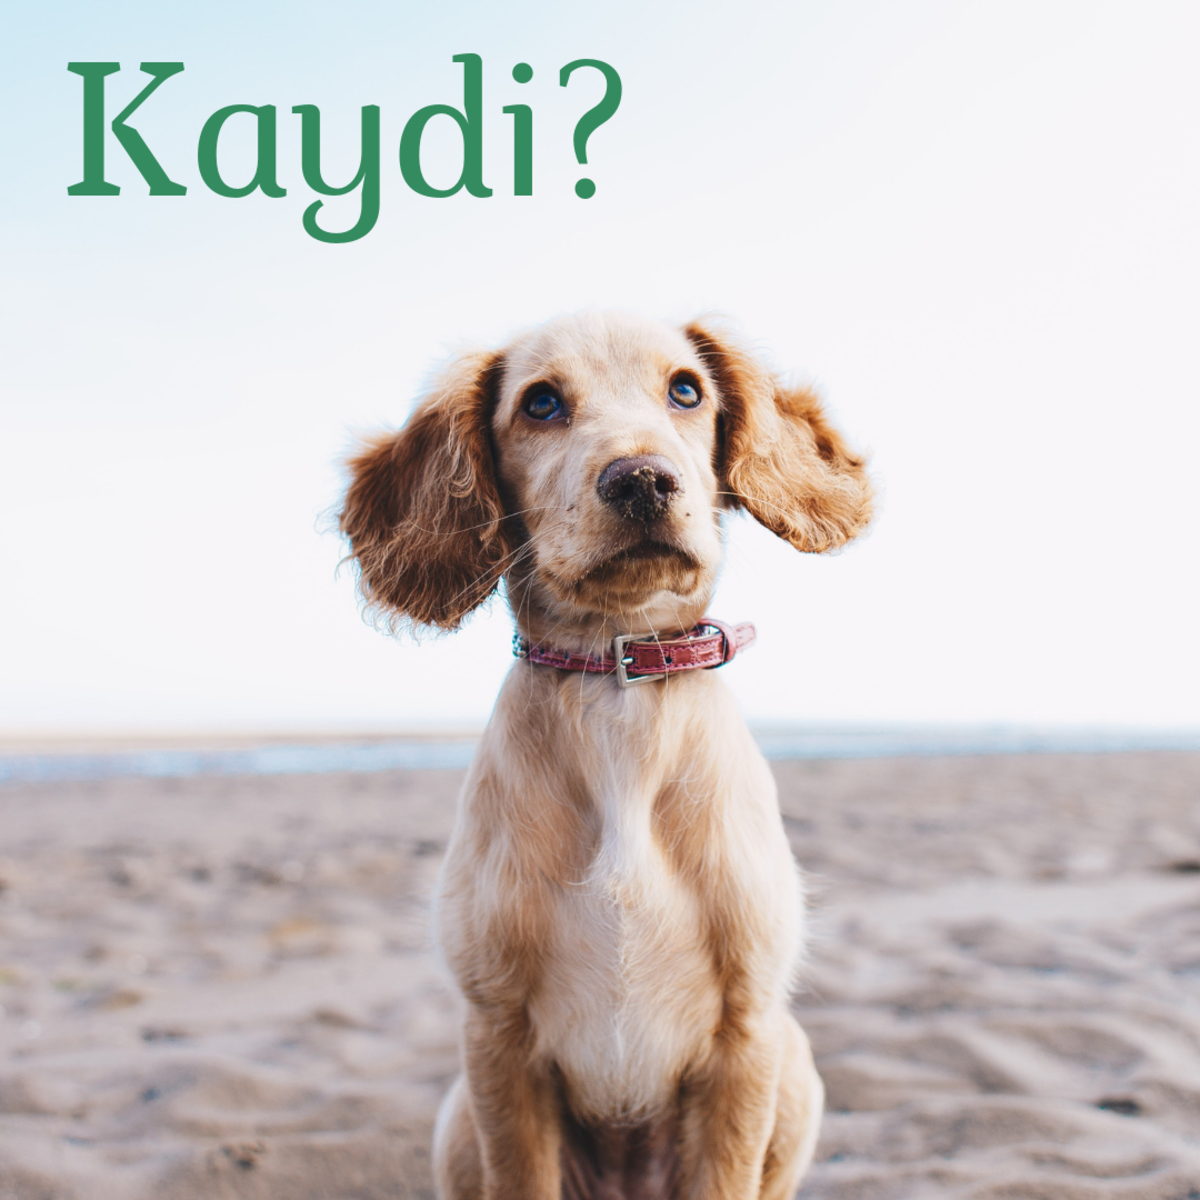 200+ Lucky Irish Dog Names and Meanings - PetHelpful